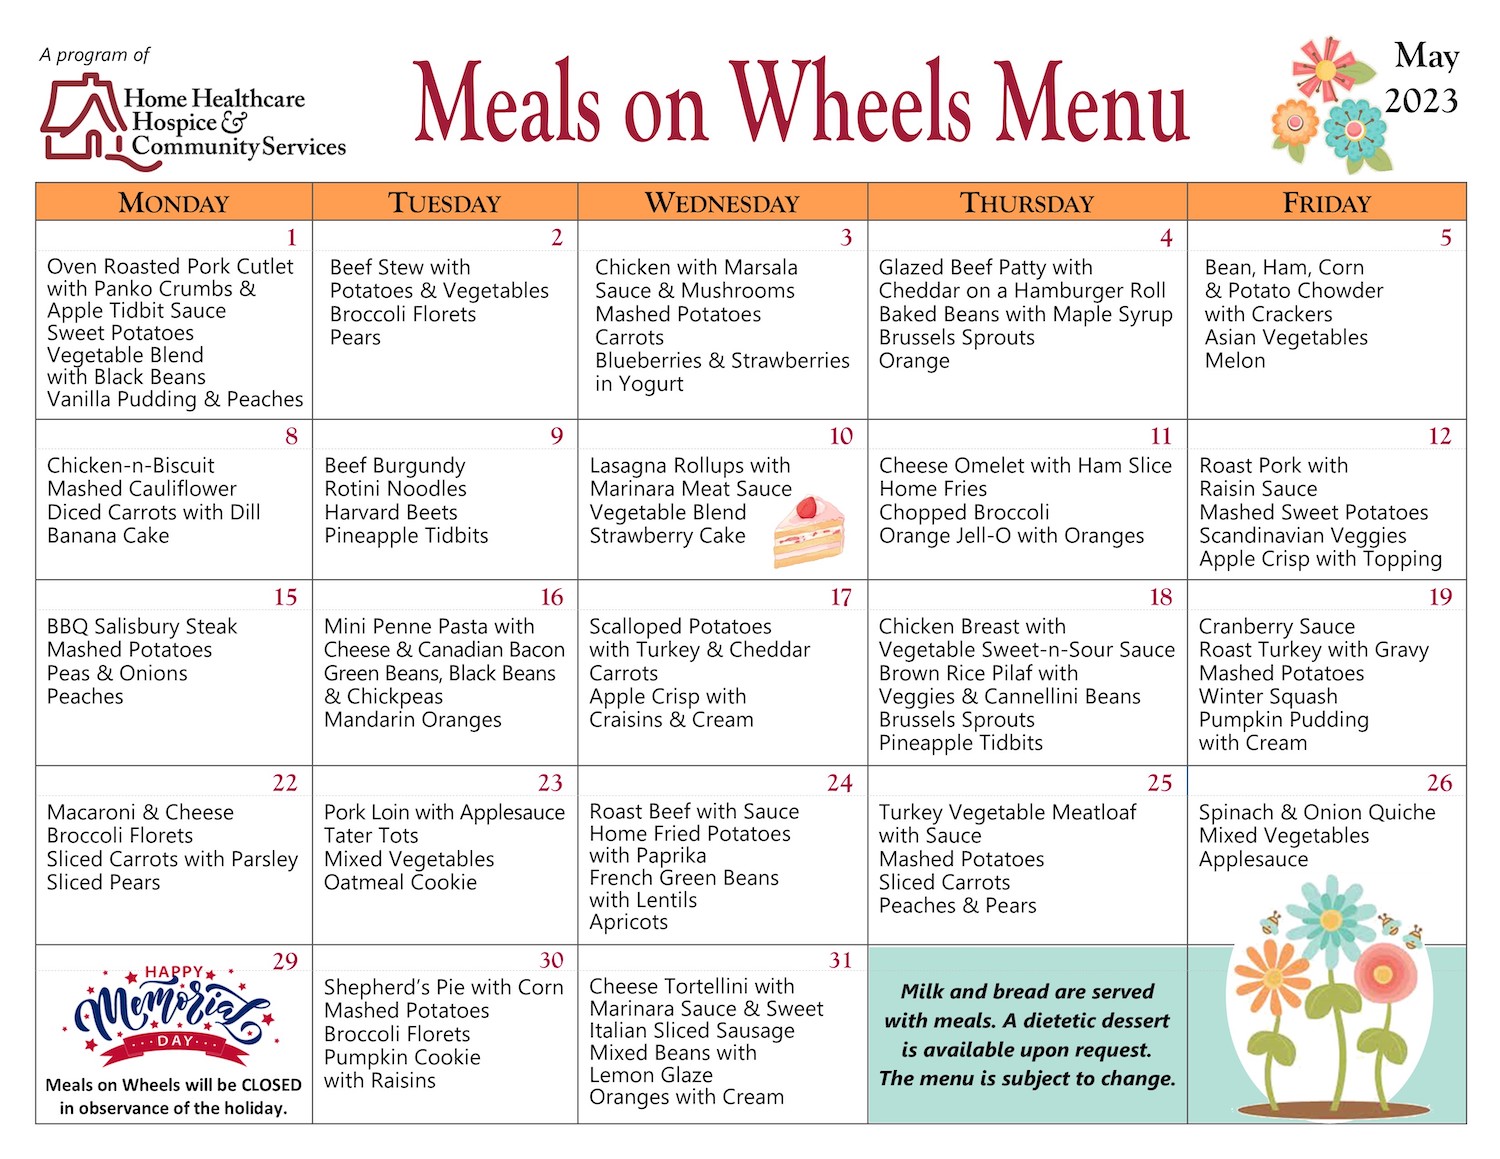 Meals On Wheels Menu for May 2023